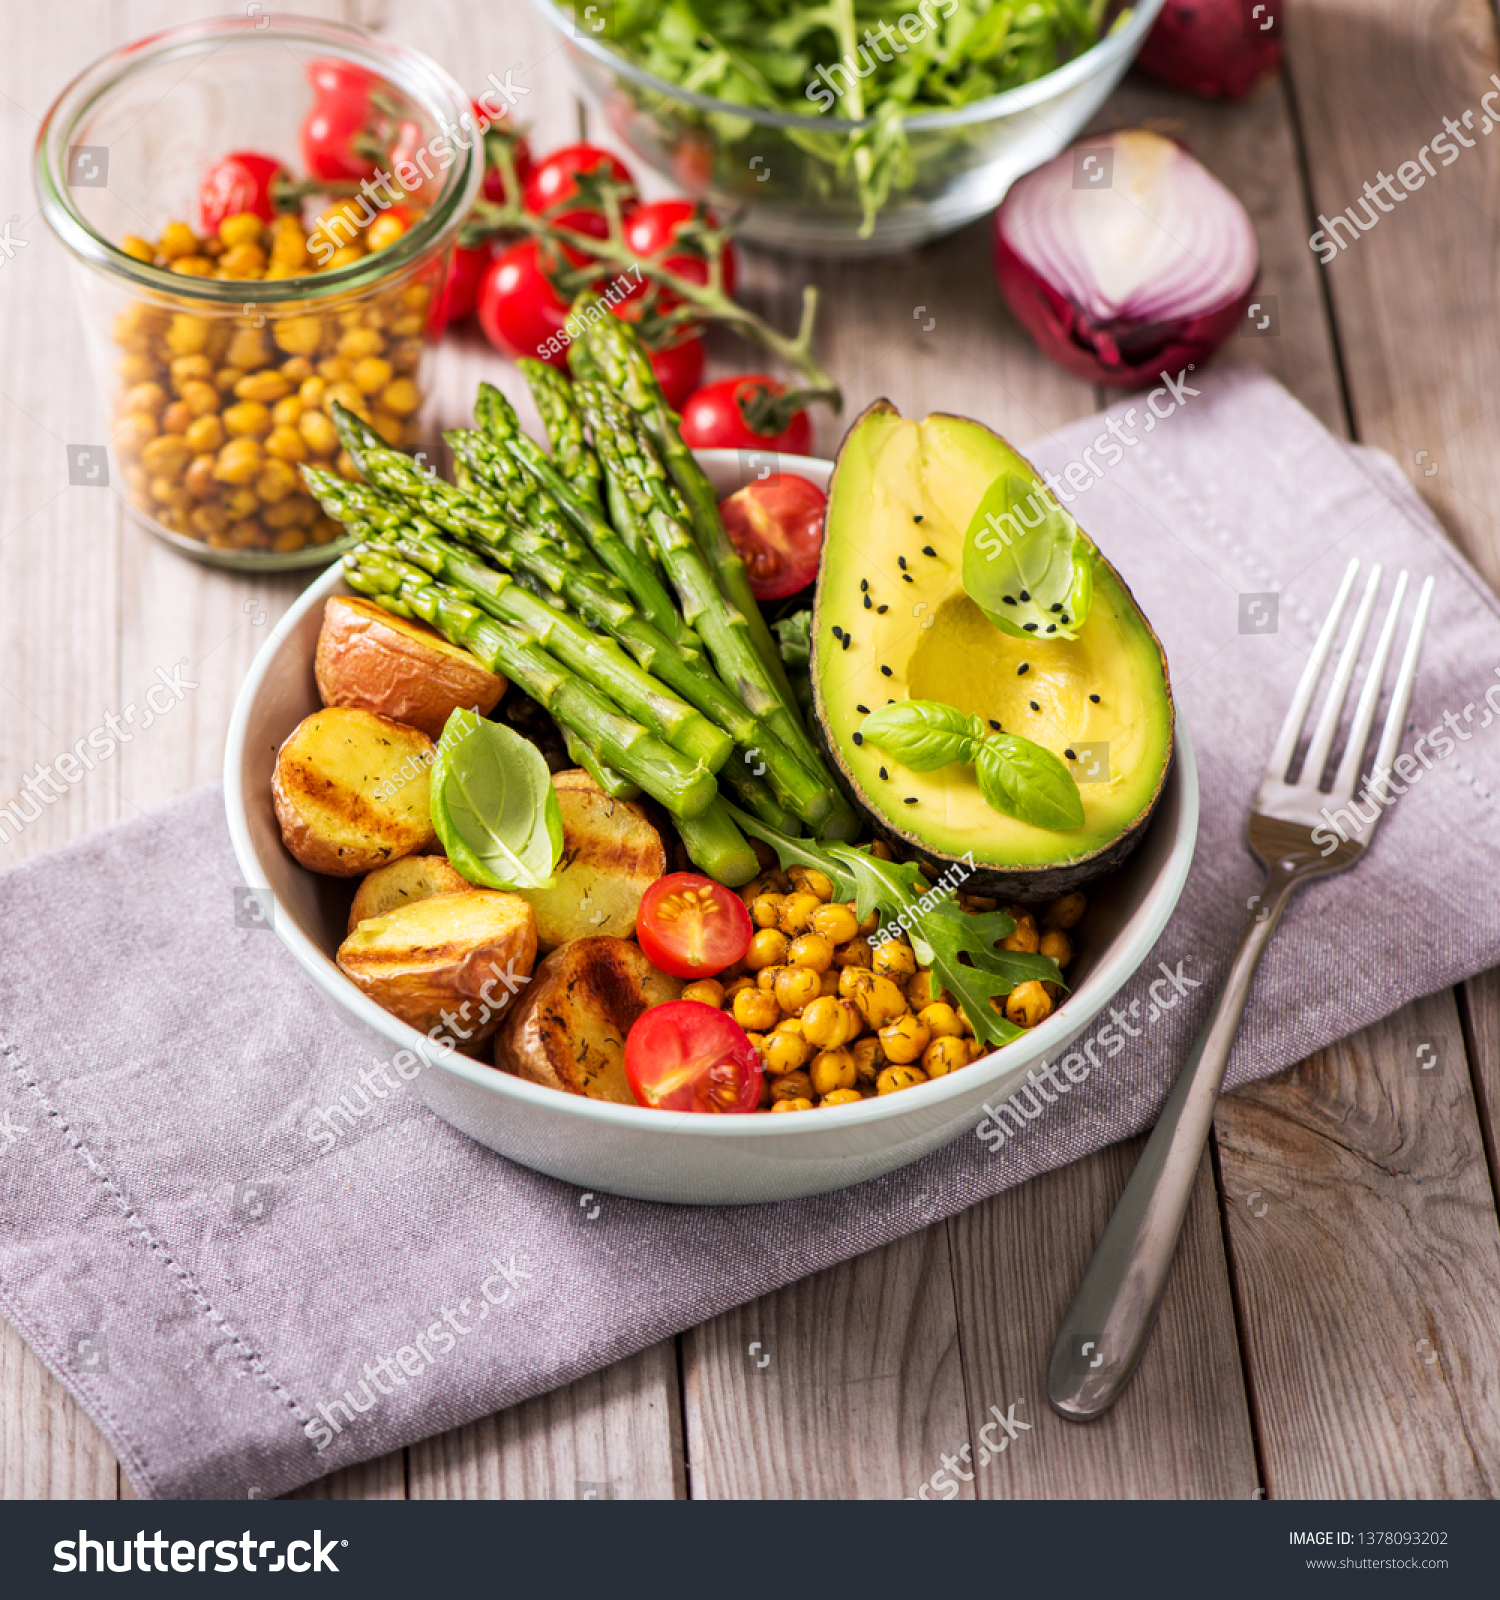 Healthy dinner or lunch with green asparagus, lentils and spicy chickpeas, avocado, arugula, vegan, vegetarian healthy food, square image  #1378093202